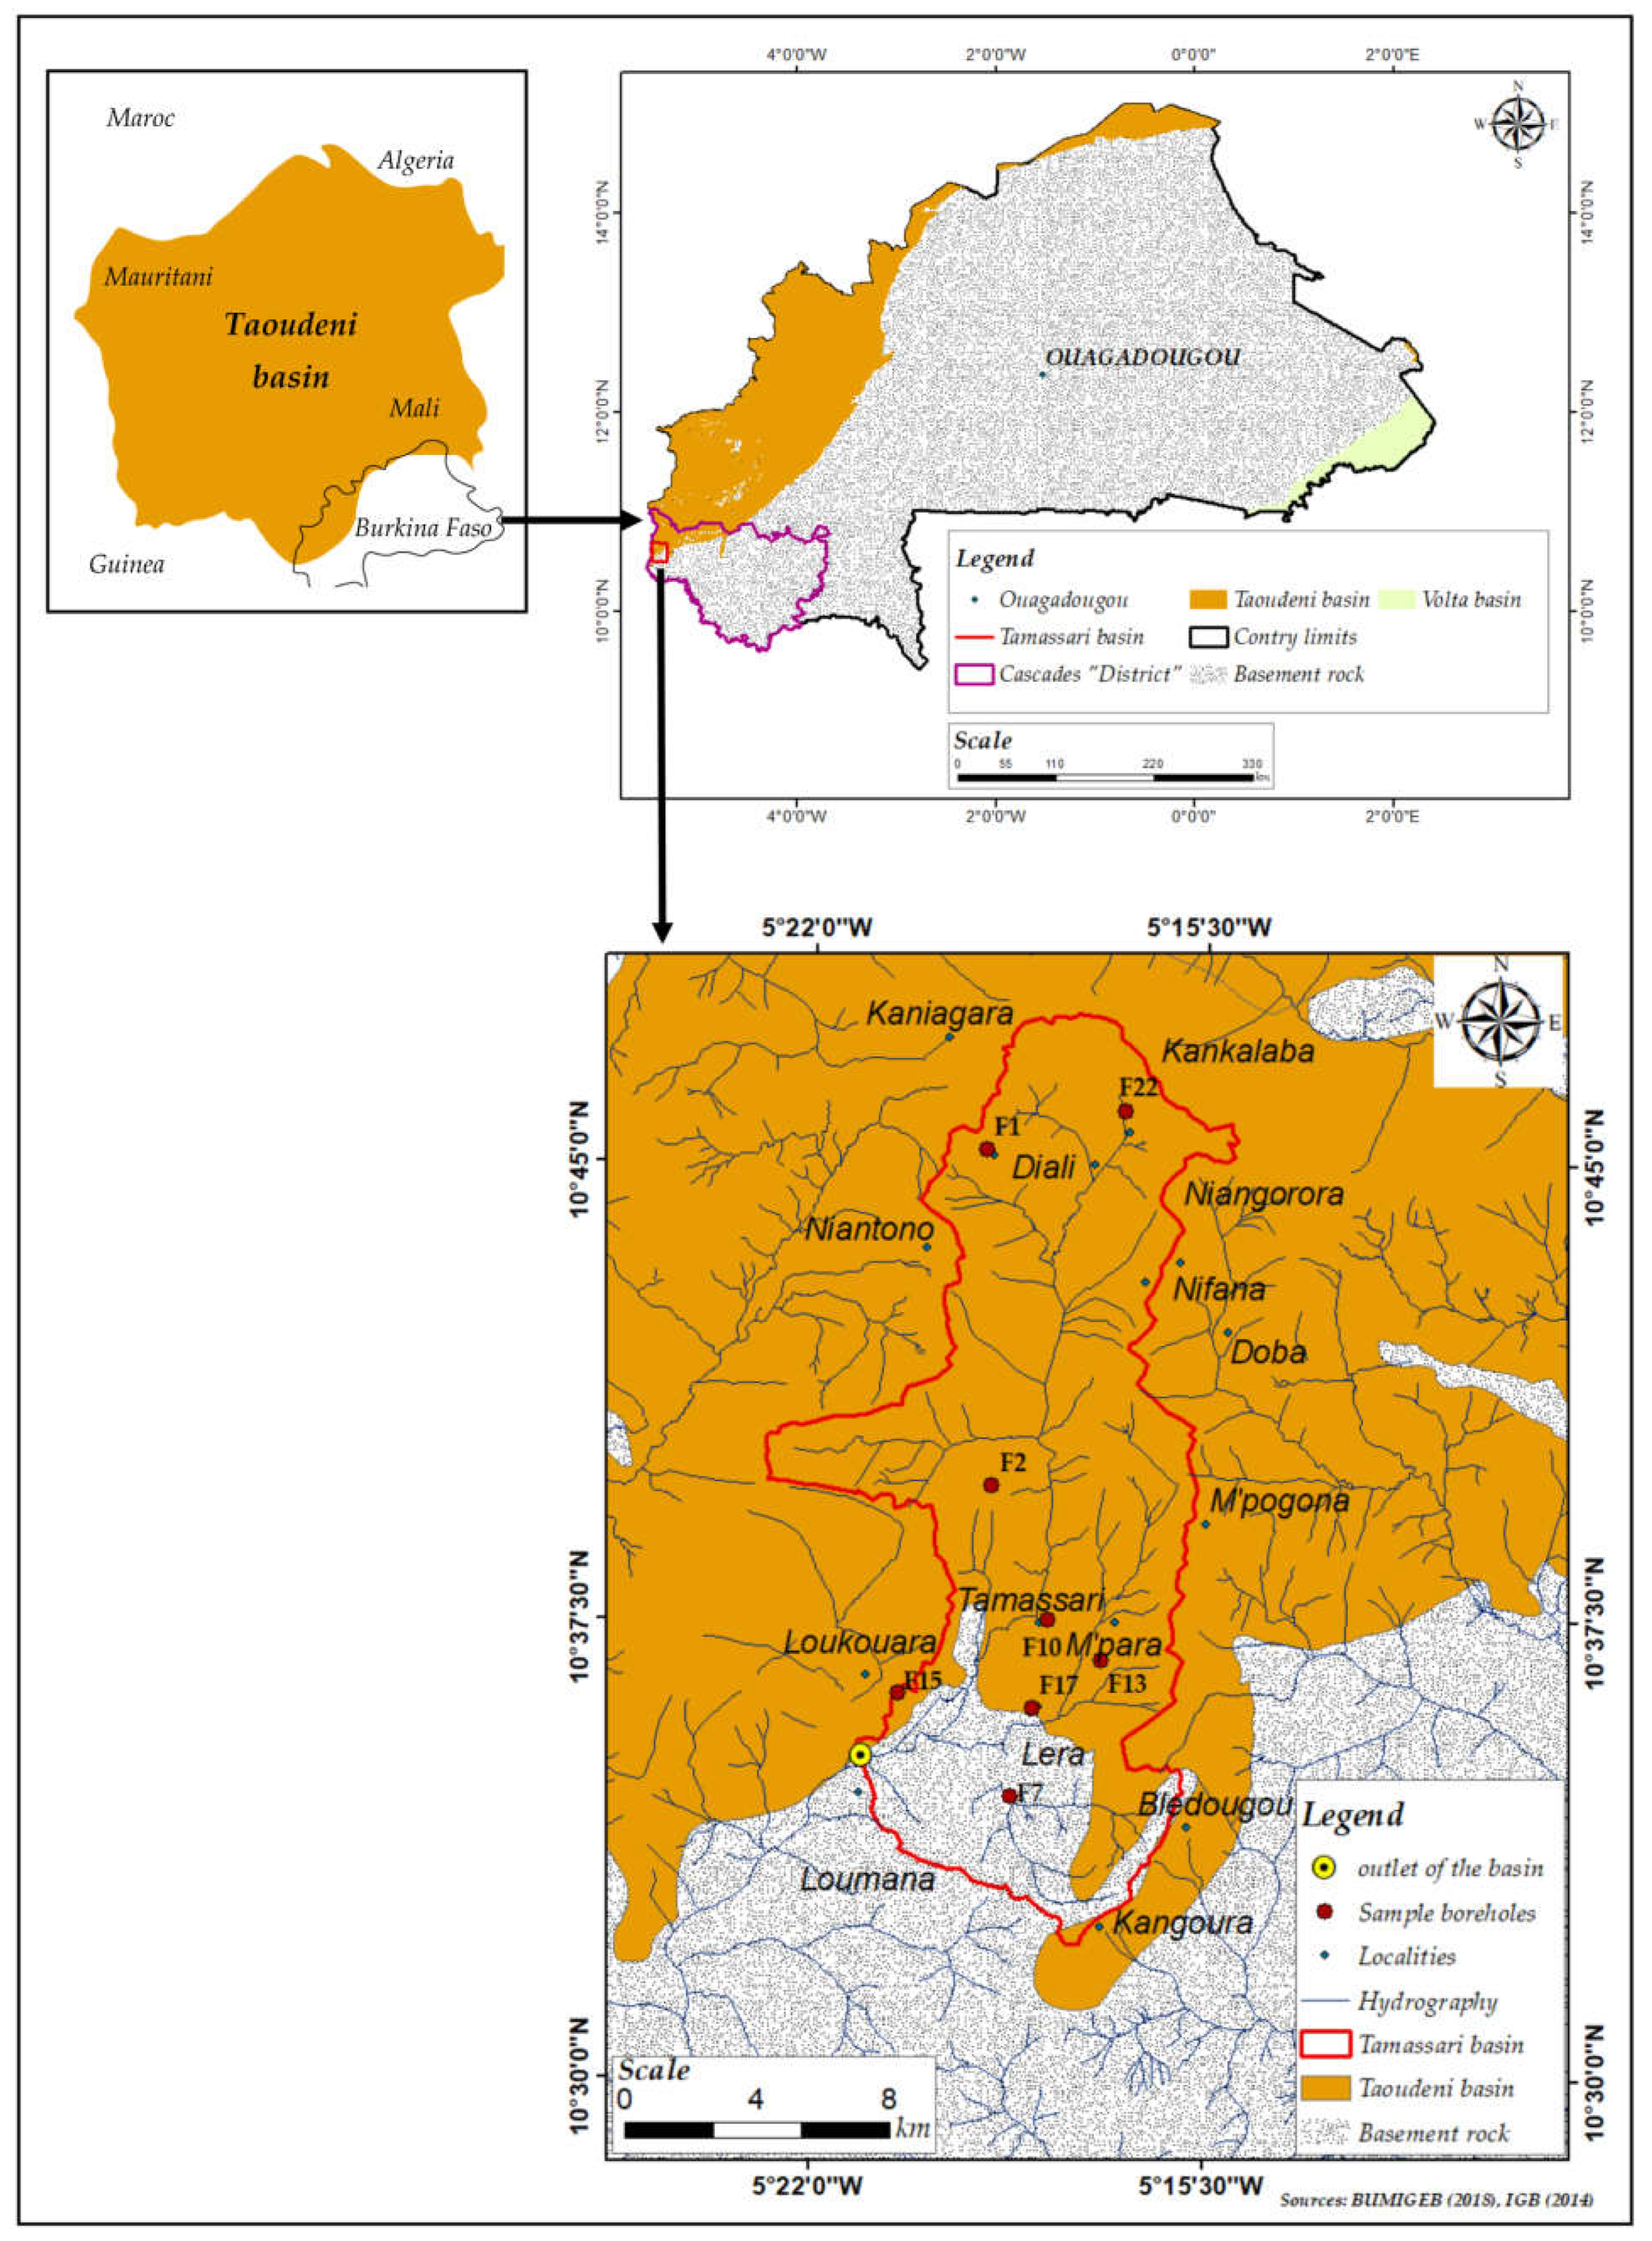 Water | Free Full-Text | Assessment of Aquifer Recharge Potential Using  Remote Sensing, GIS and the Analytical Hierarchy Process (AHP) Combined  with Hydrochemical and Isotope Data (Tamassari Basin, Burkina Faso)